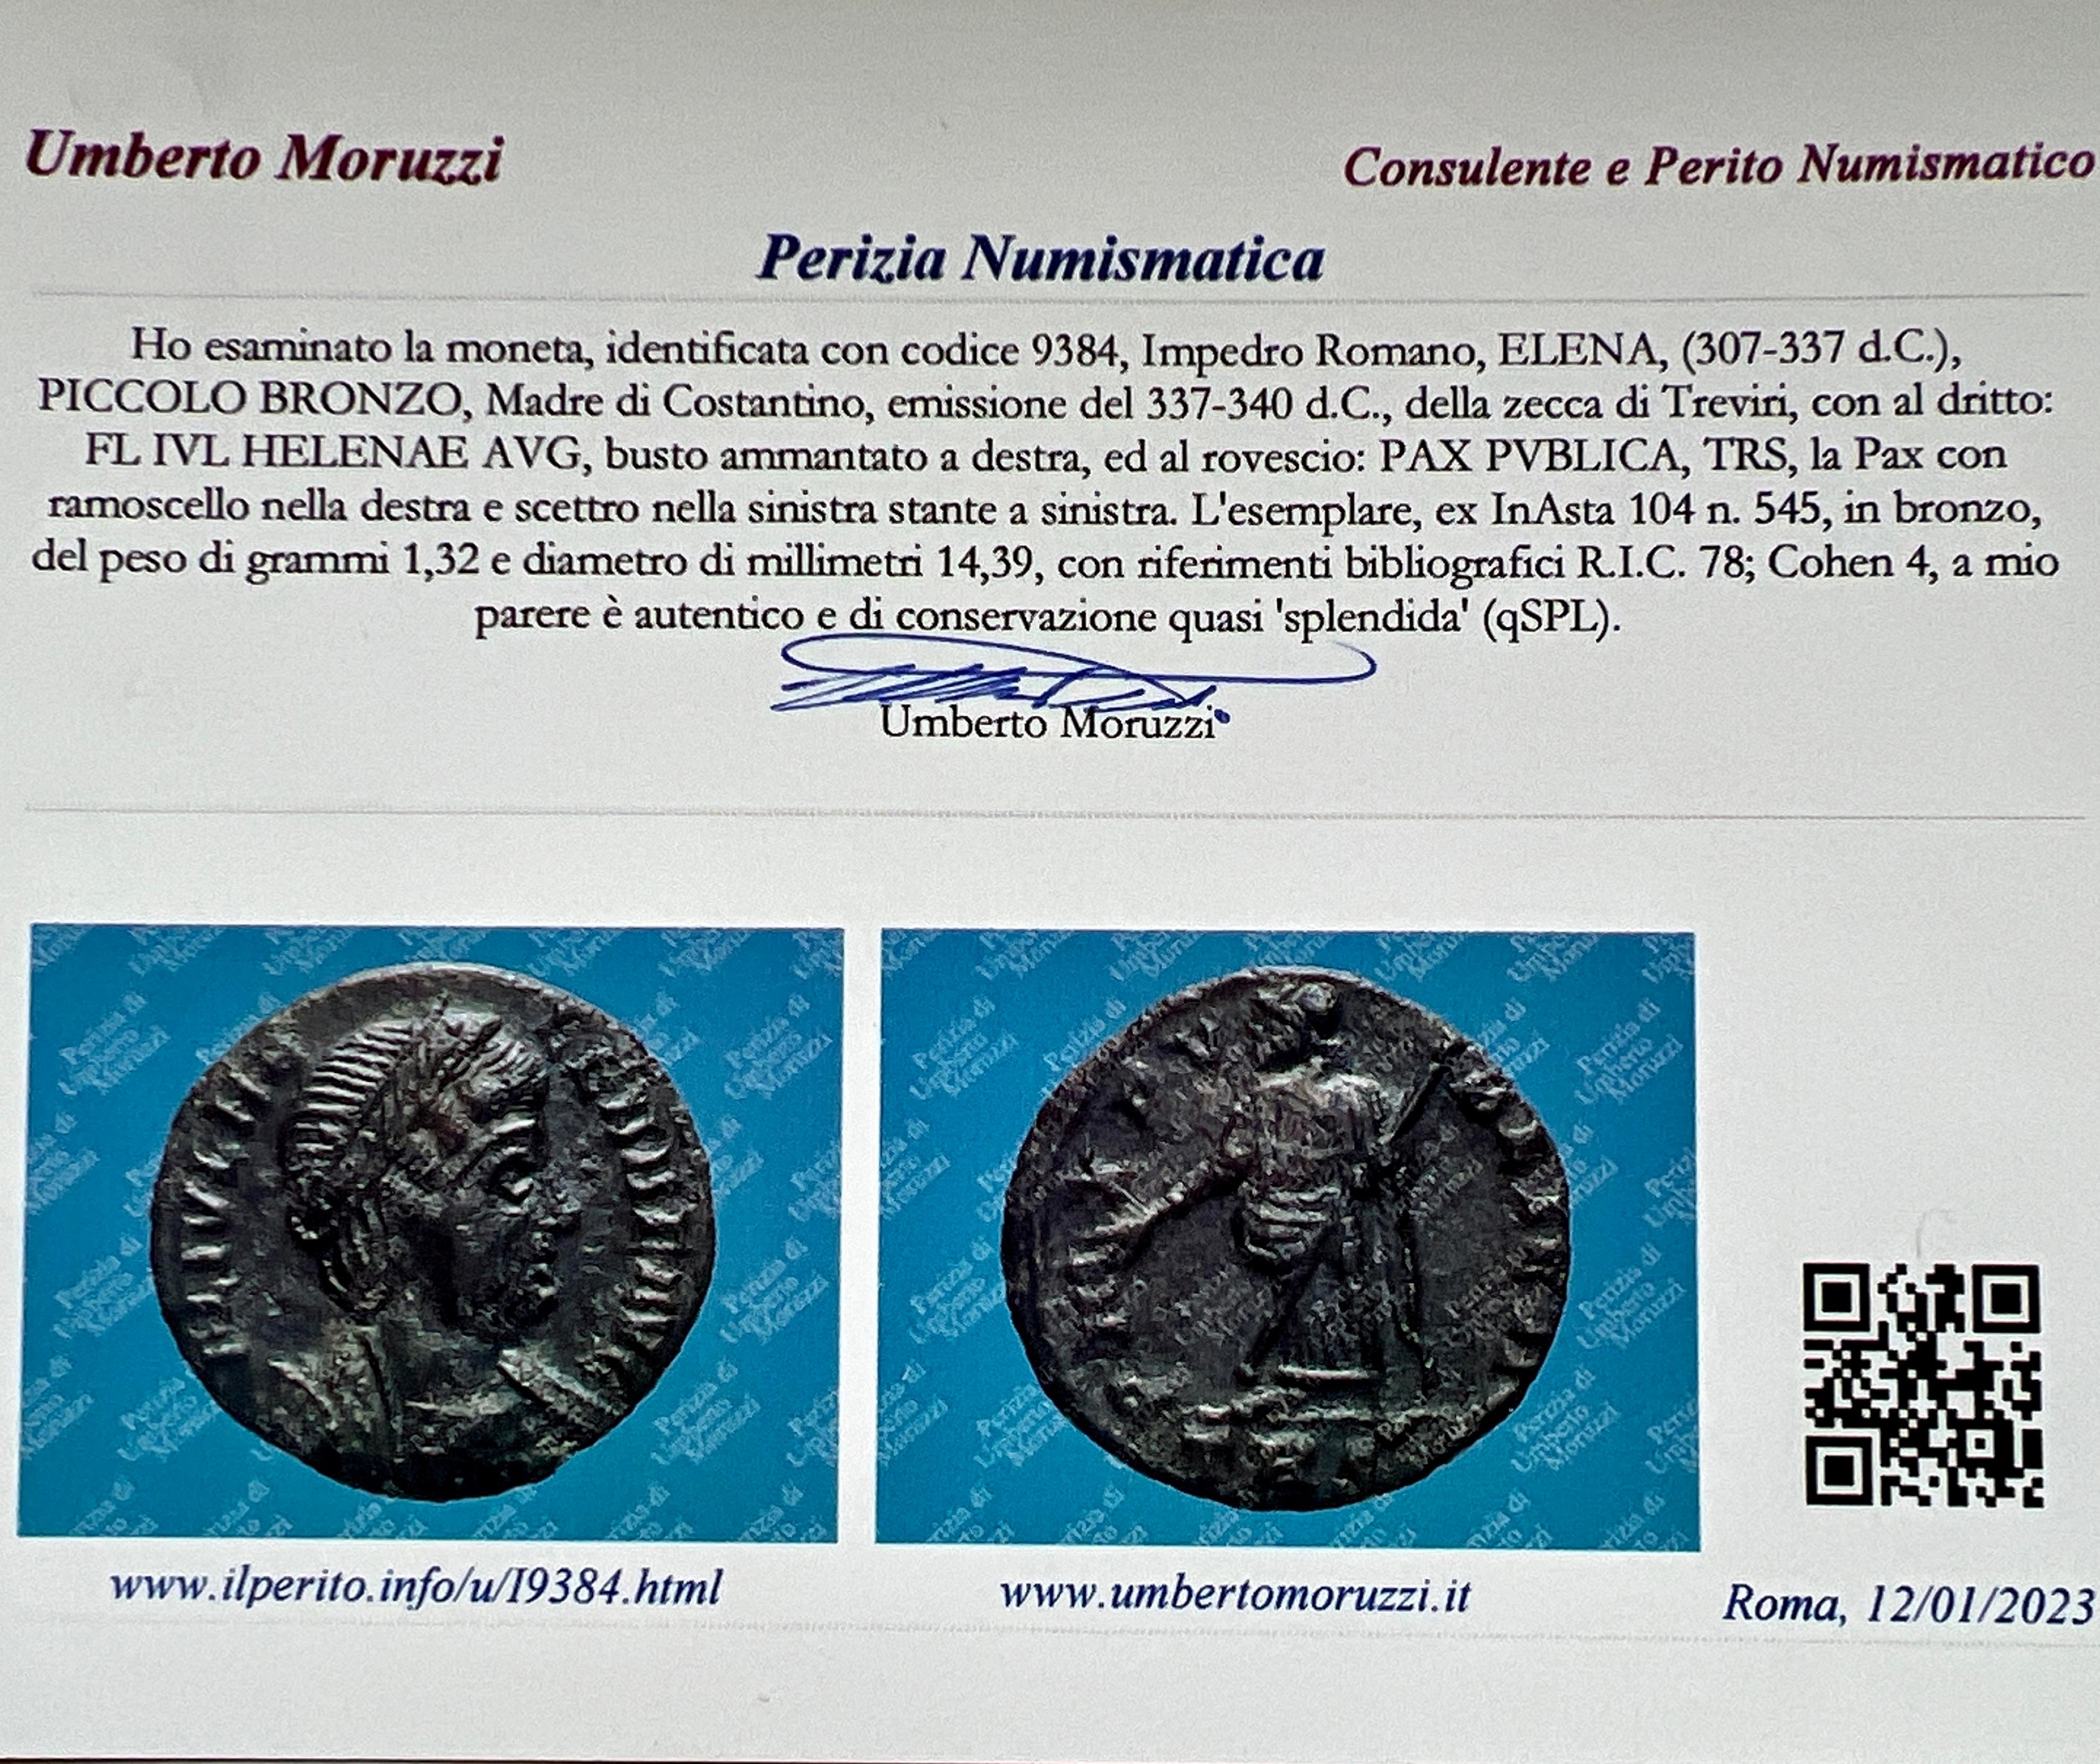 Original and One-of-a-kind 337 A.D. Bronze Coin, a Follis(Little Bronze) featuring on the front Helena's, Emperor Costantino's Mother Head and on the back Pax Dea(Peace Goddess) with a twig on her left hand and a scepter on her right hand in a four